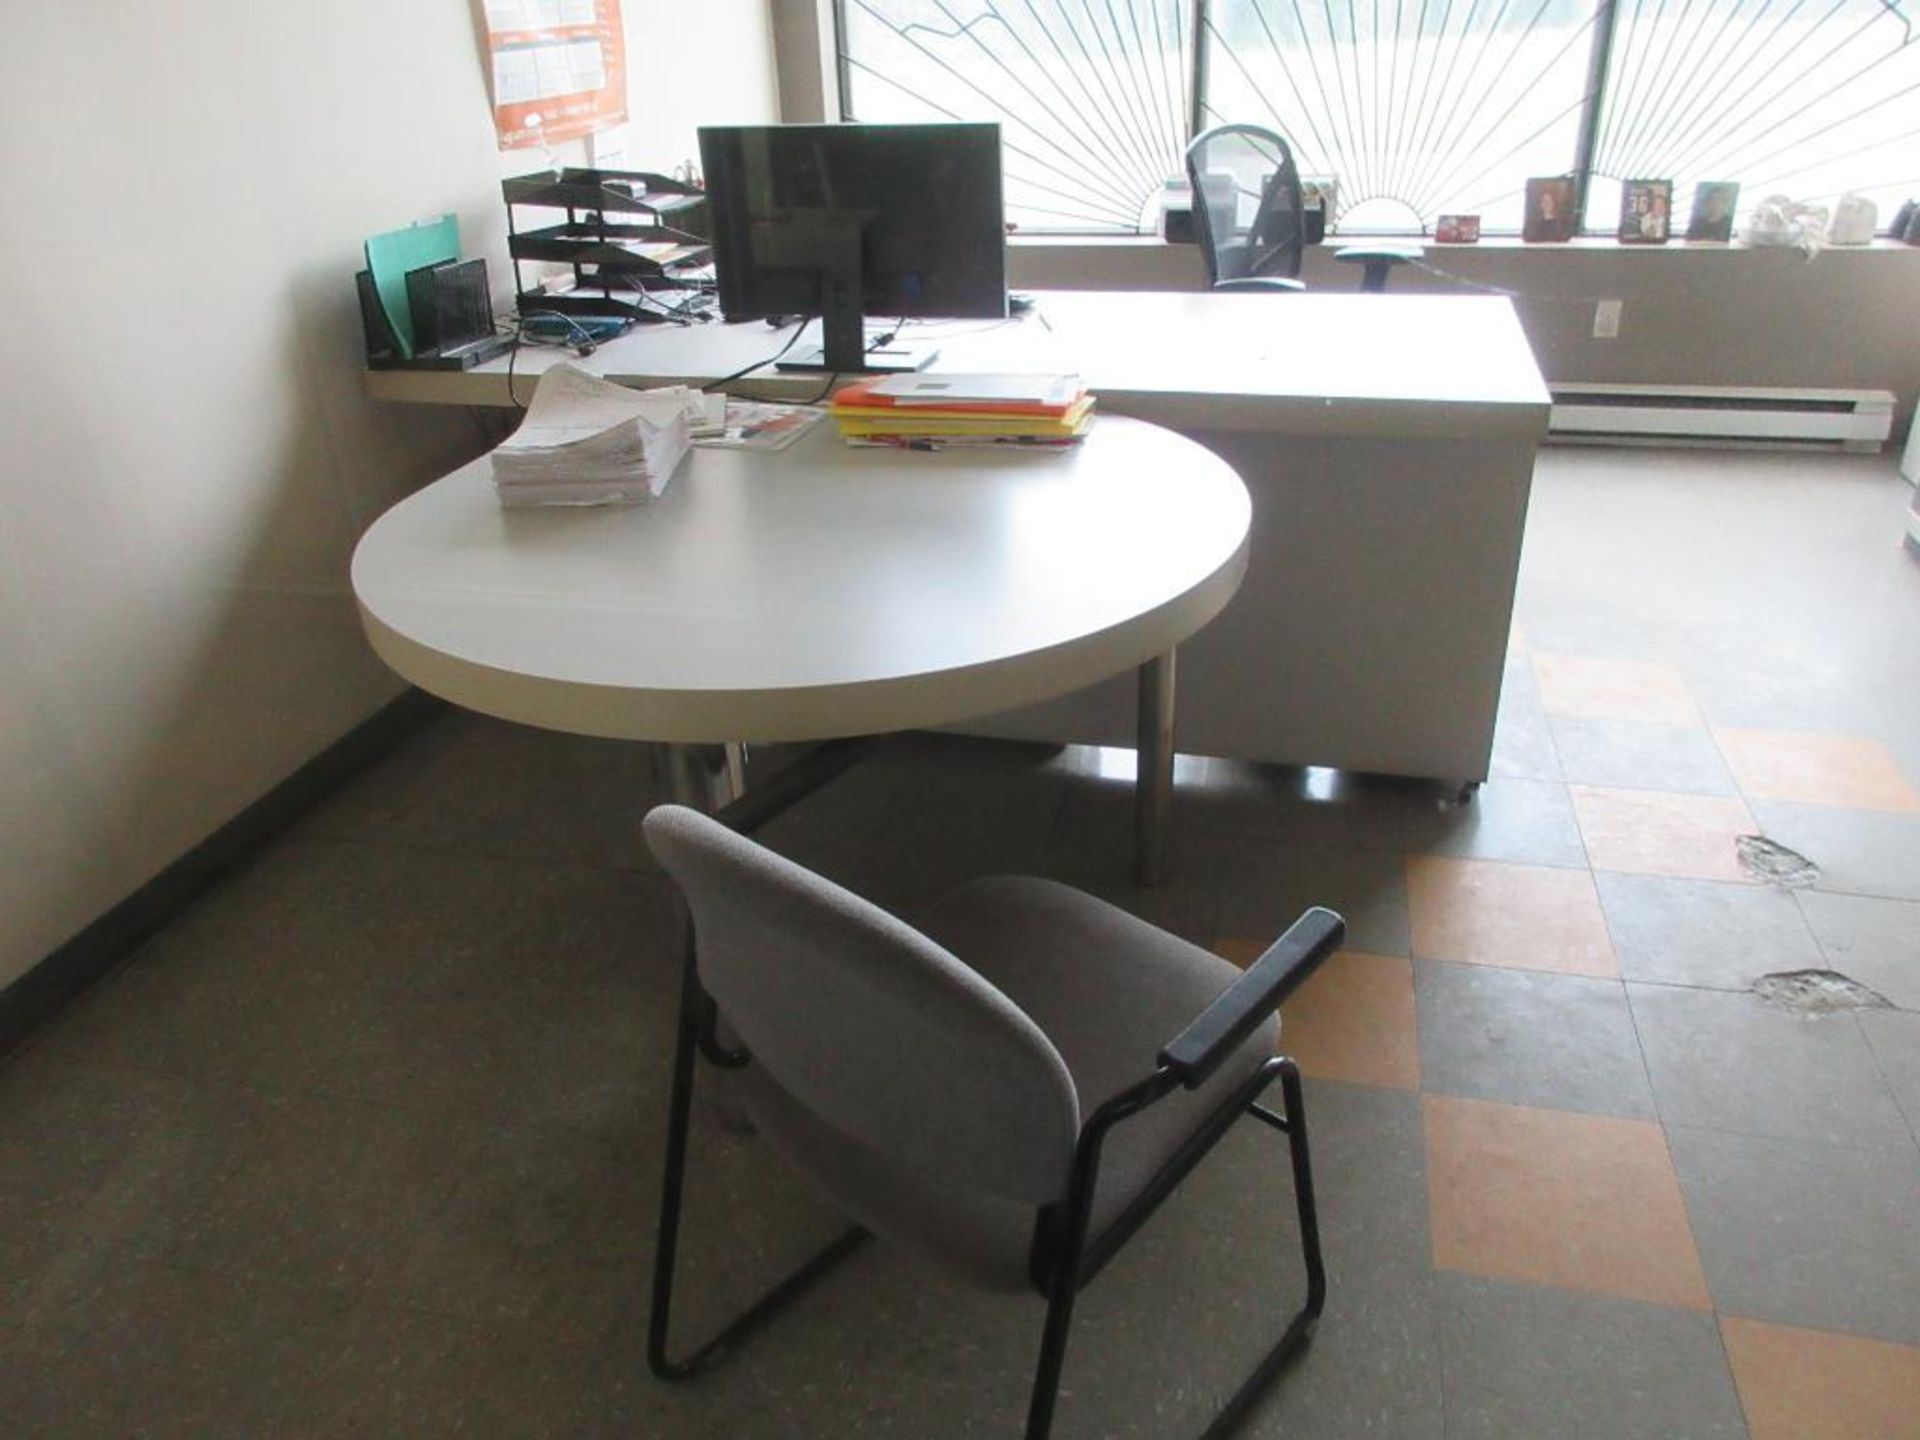 CONTENTS OF 1 OFFICE INCL L SHAPED DESK, ROUND TABLE, 2 CHAIRS, 3 FILE CABINETS AND 1 BOOKCASE (NO E - Image 3 of 6